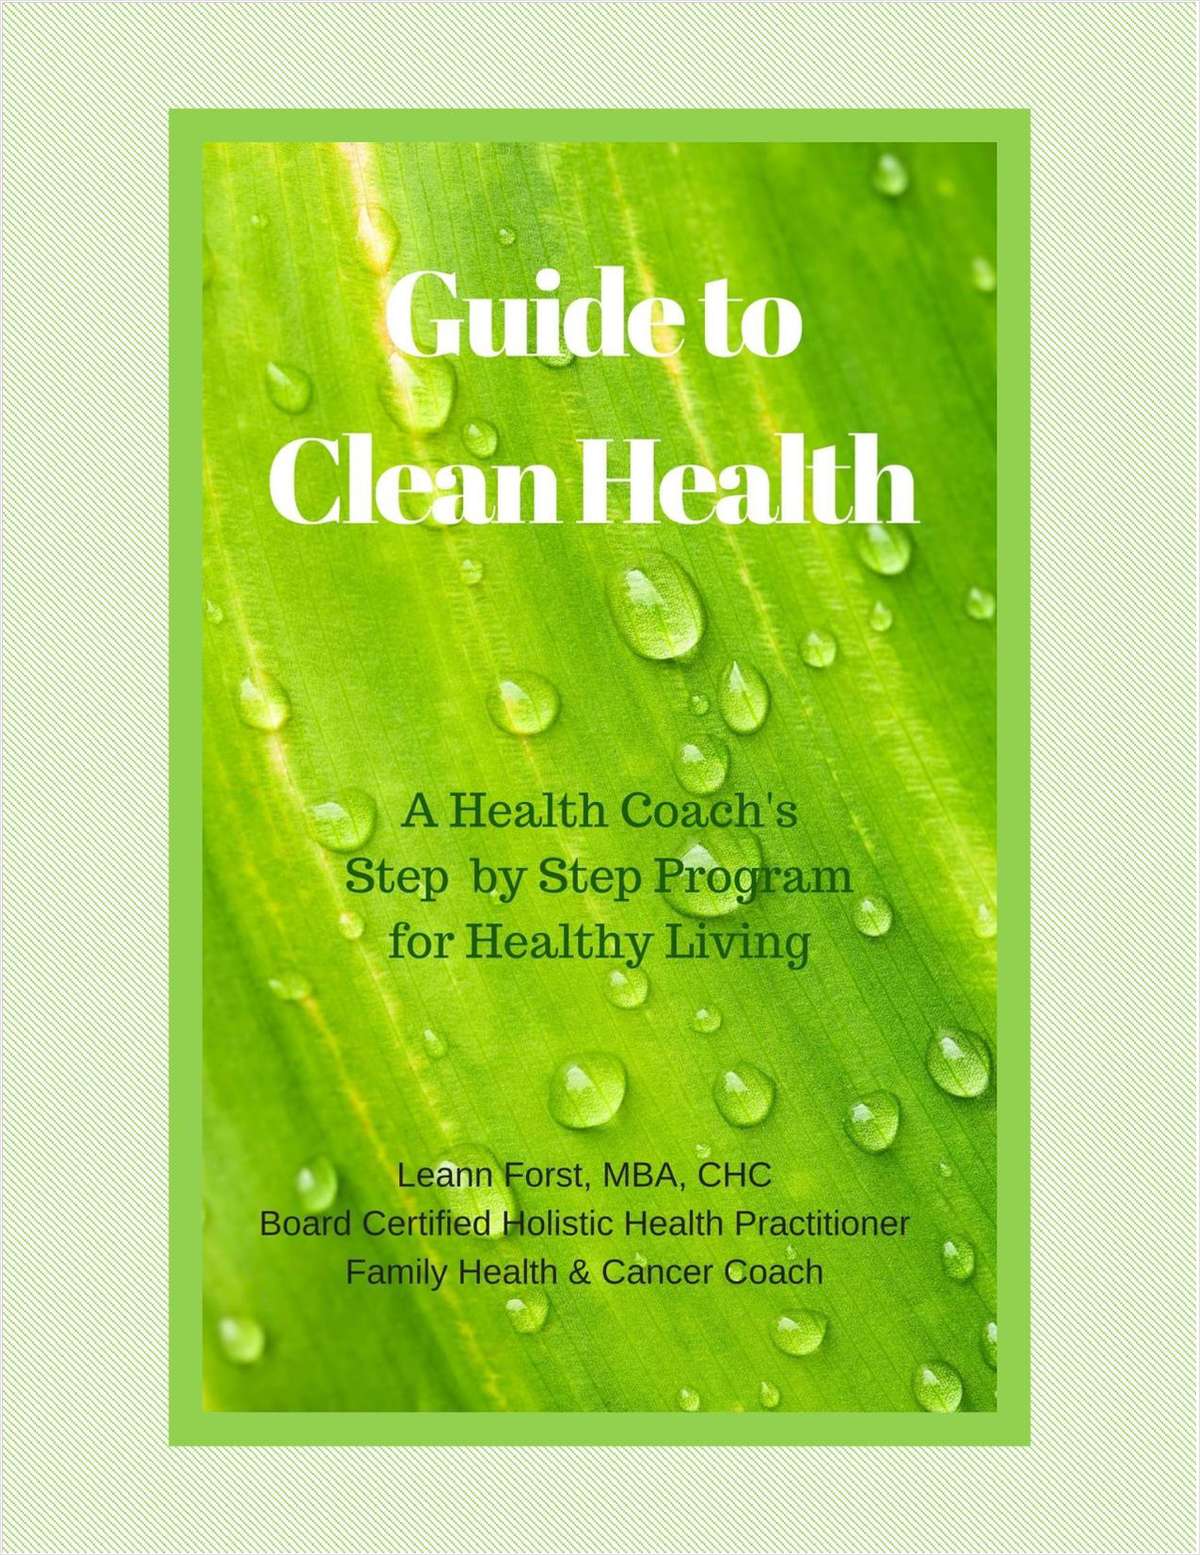 Guide to Clean Health - A Health Coach's Step by Step Program for Healthy Living